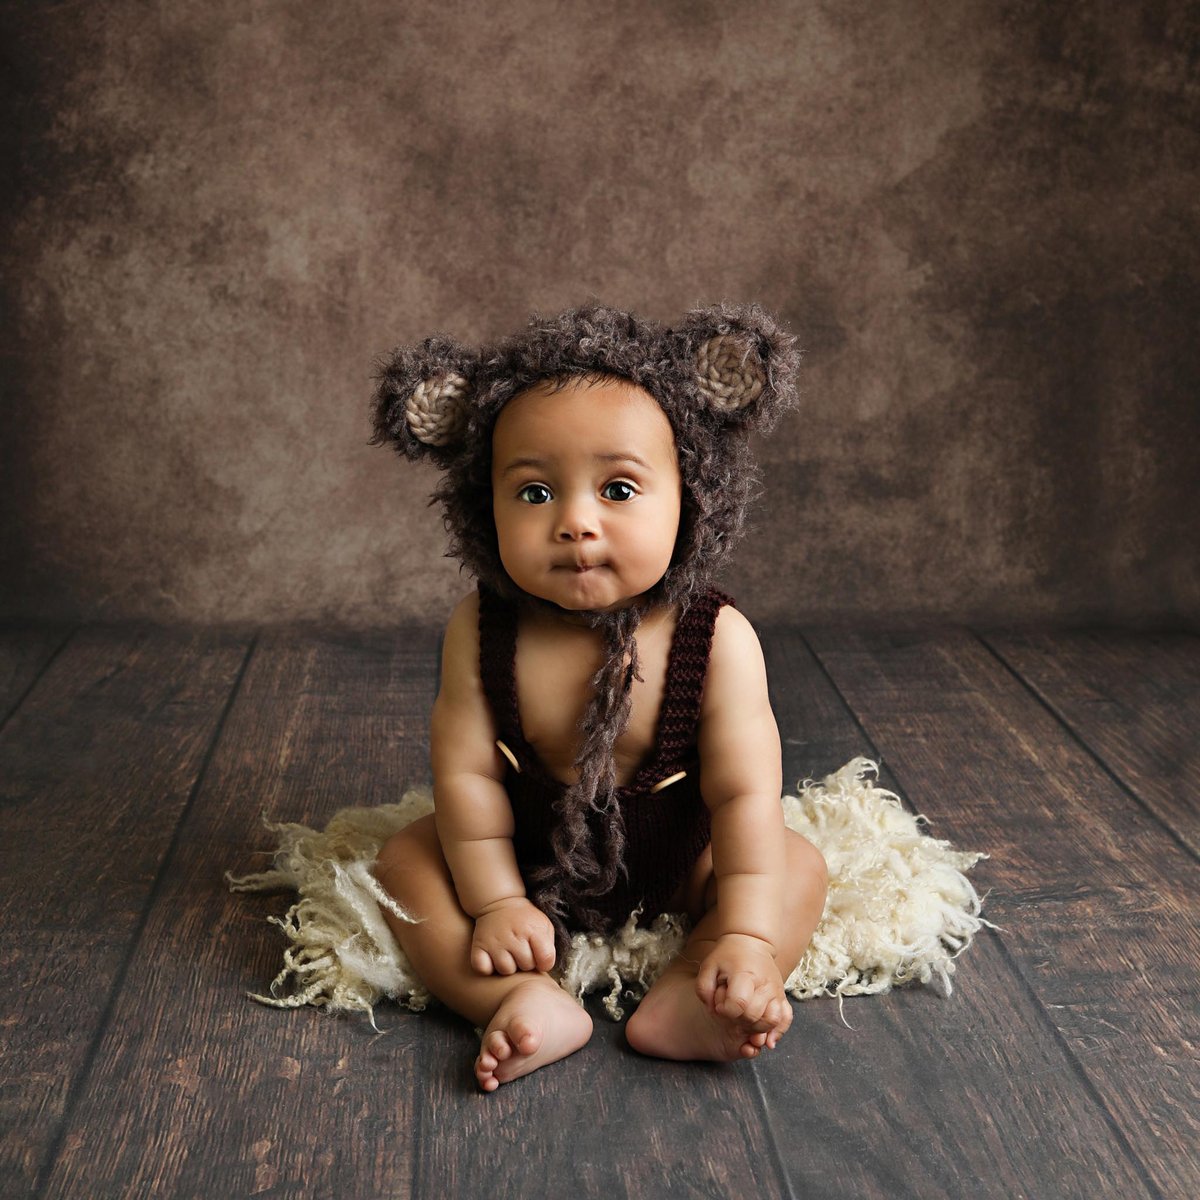 baby with cute bear ears posing for a professionally taken photograph